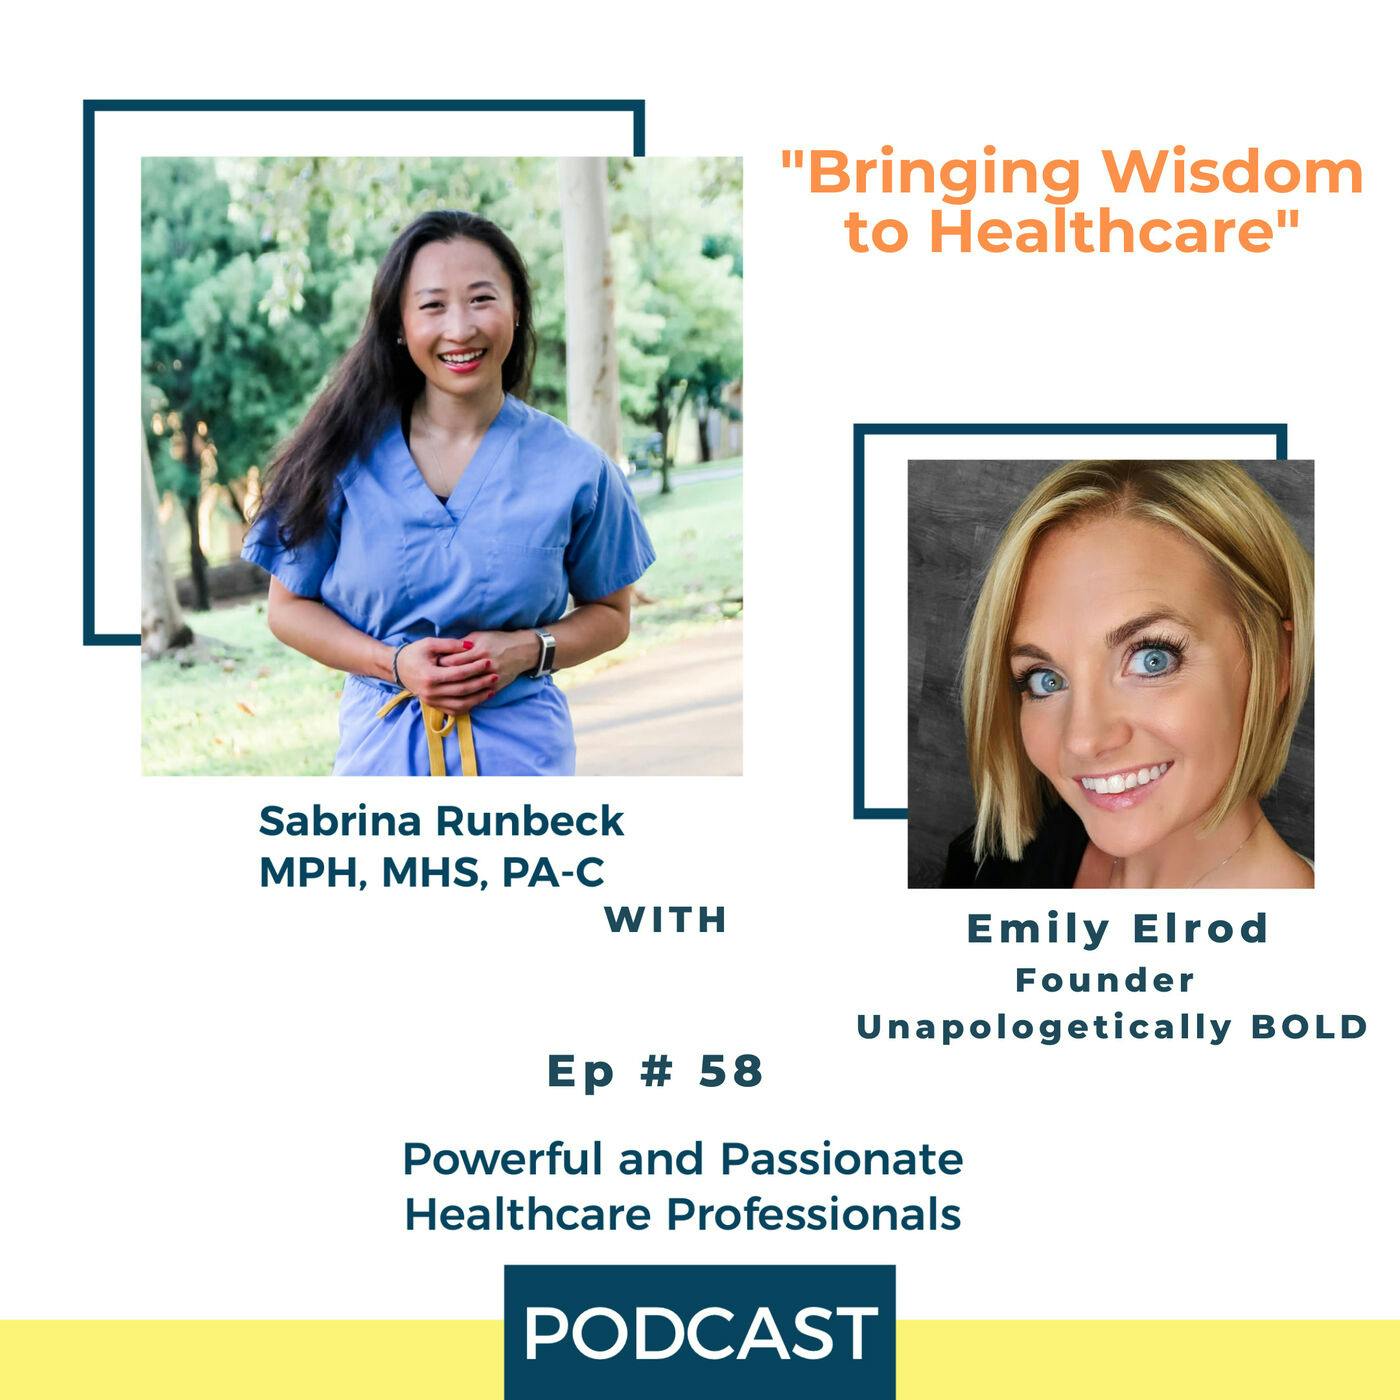 Ep 58 – Bringing Wisdom to Healthcare with Emily Elrod